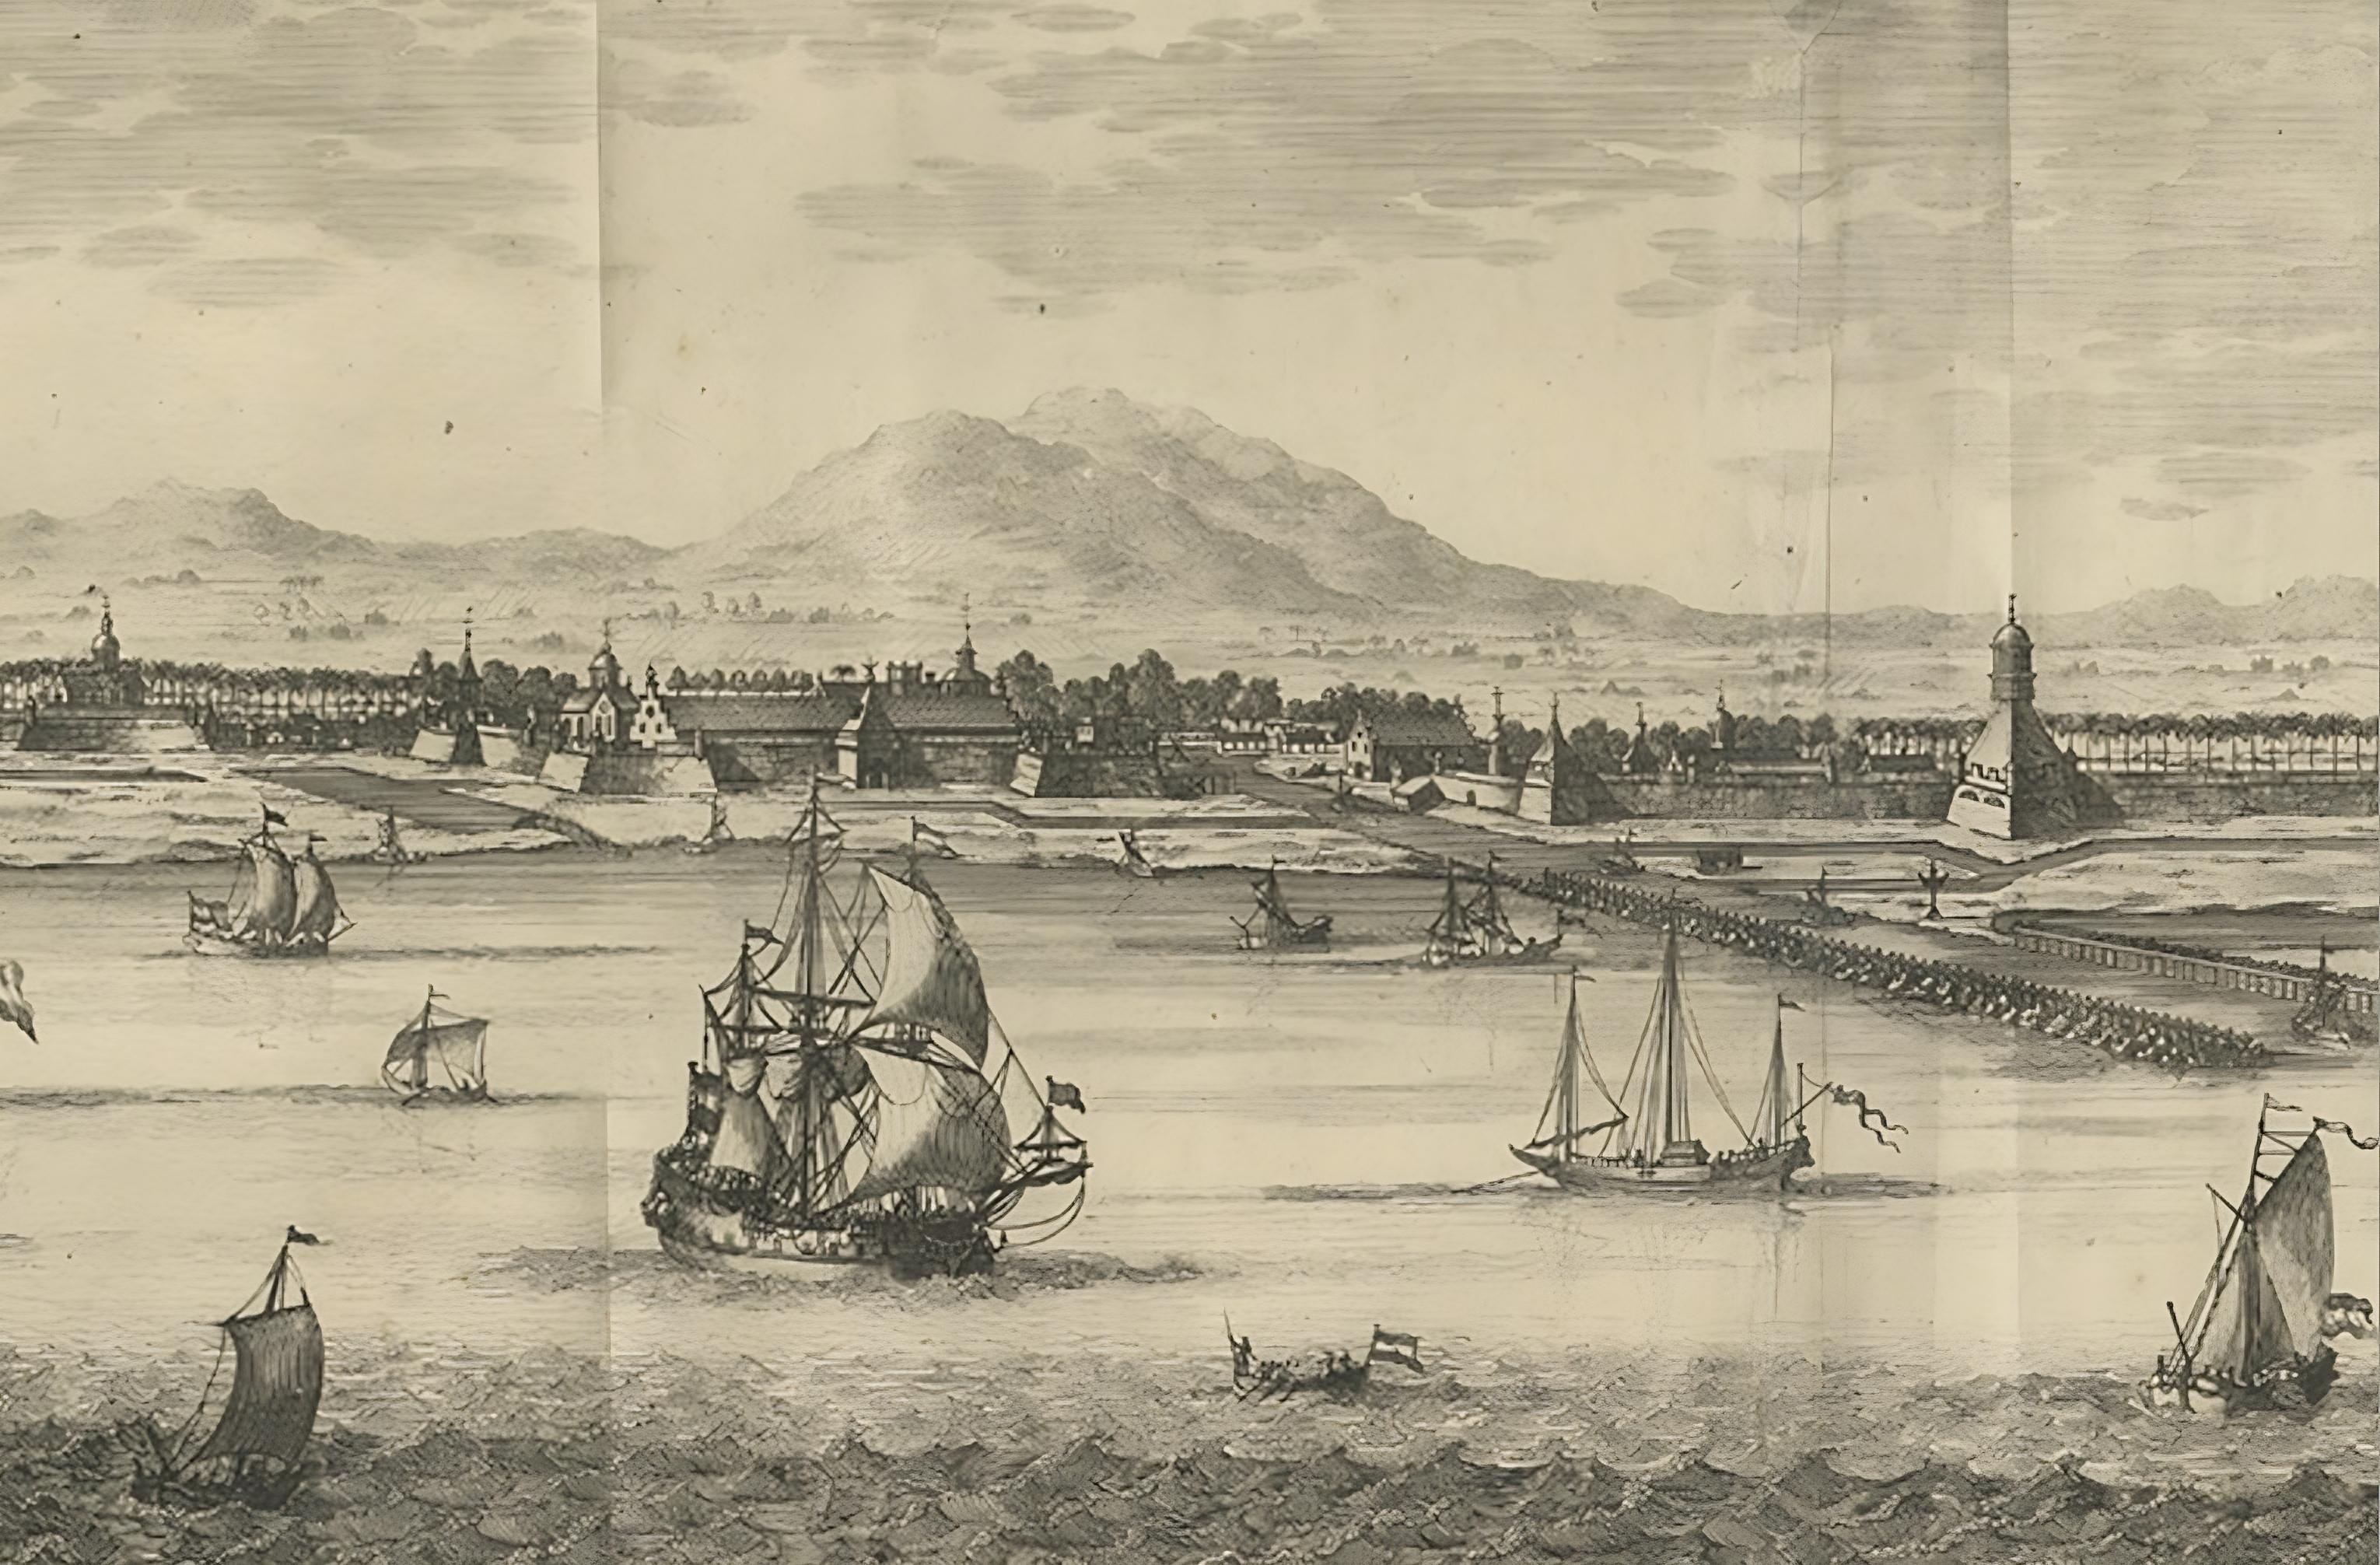 Antique print titled 'Batavia in 't Verschiet'. Attractive panorama view of Batavia, the pearl of the east. The bird eye's view shows the roadstead of the city, filled with VOC East Indiamen and Asian trading ships. The ship's reflections are